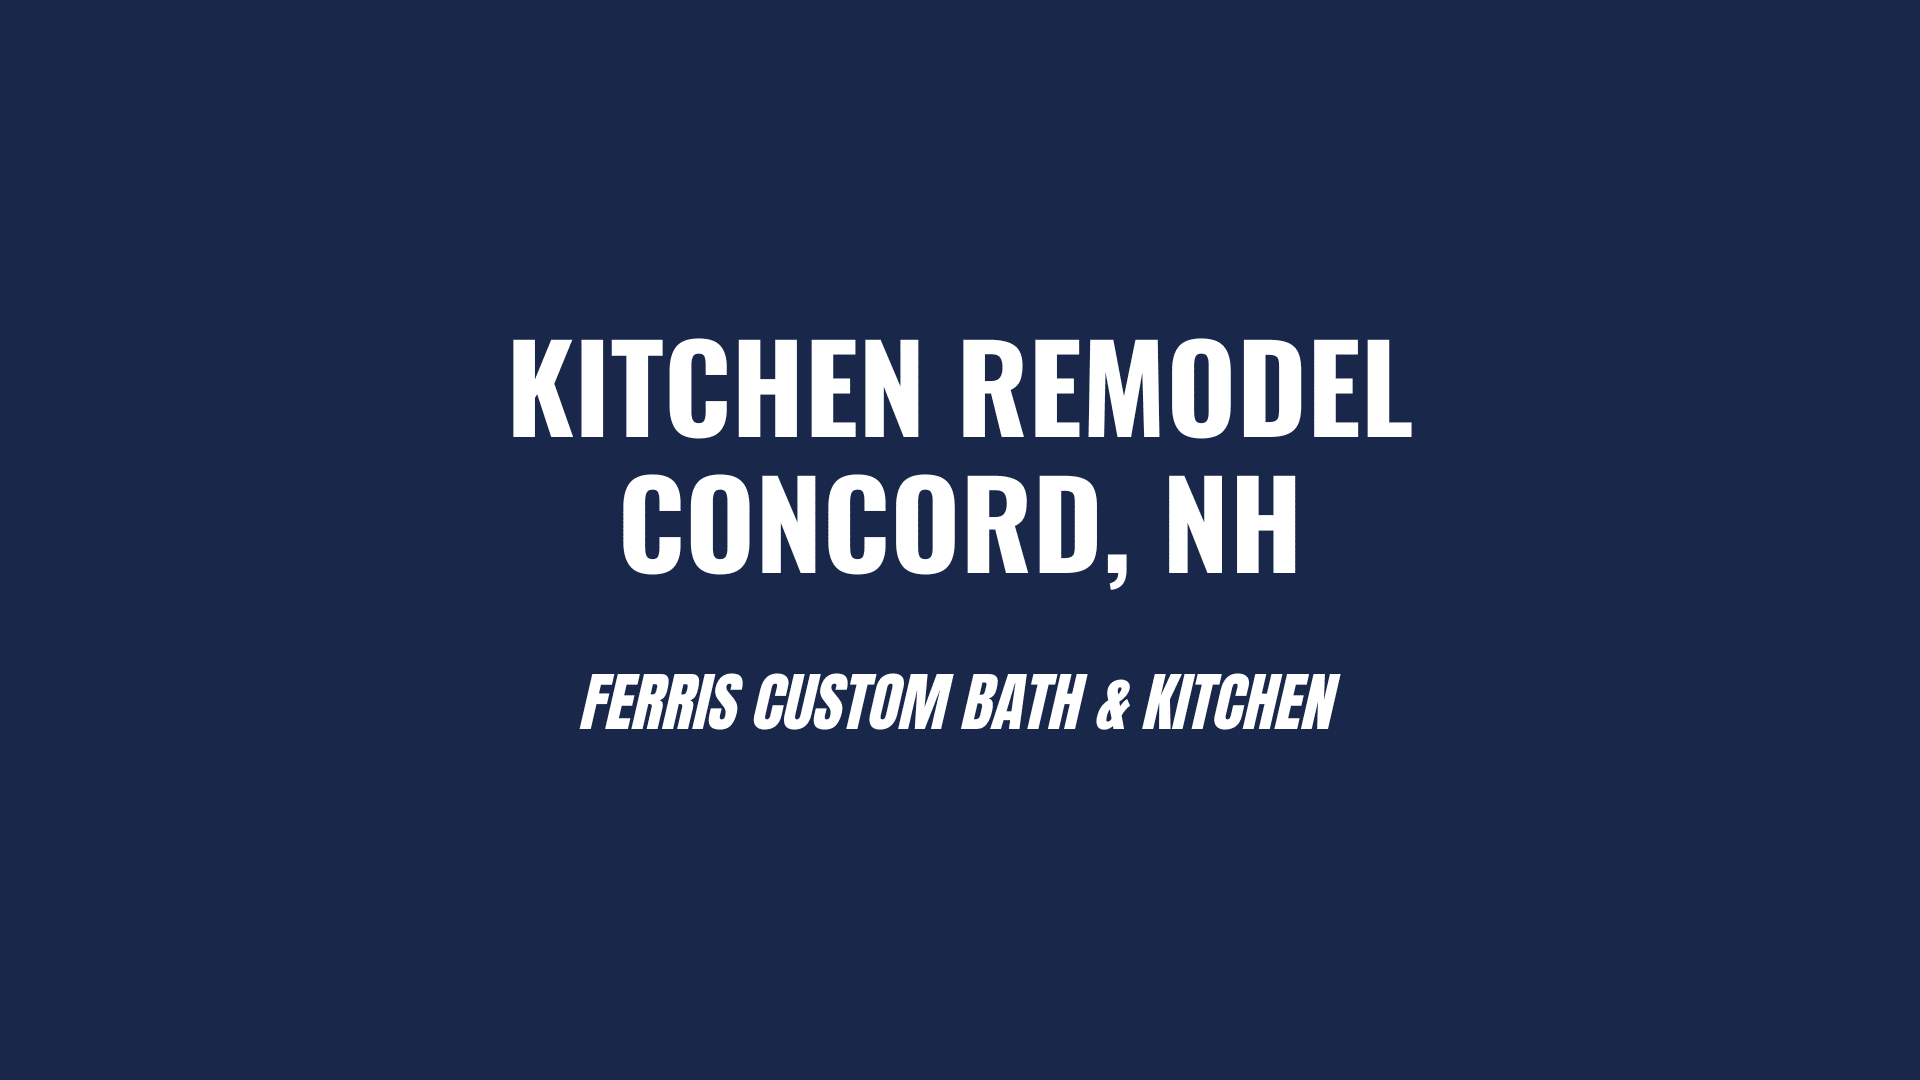 Kitchen remodel concord nh